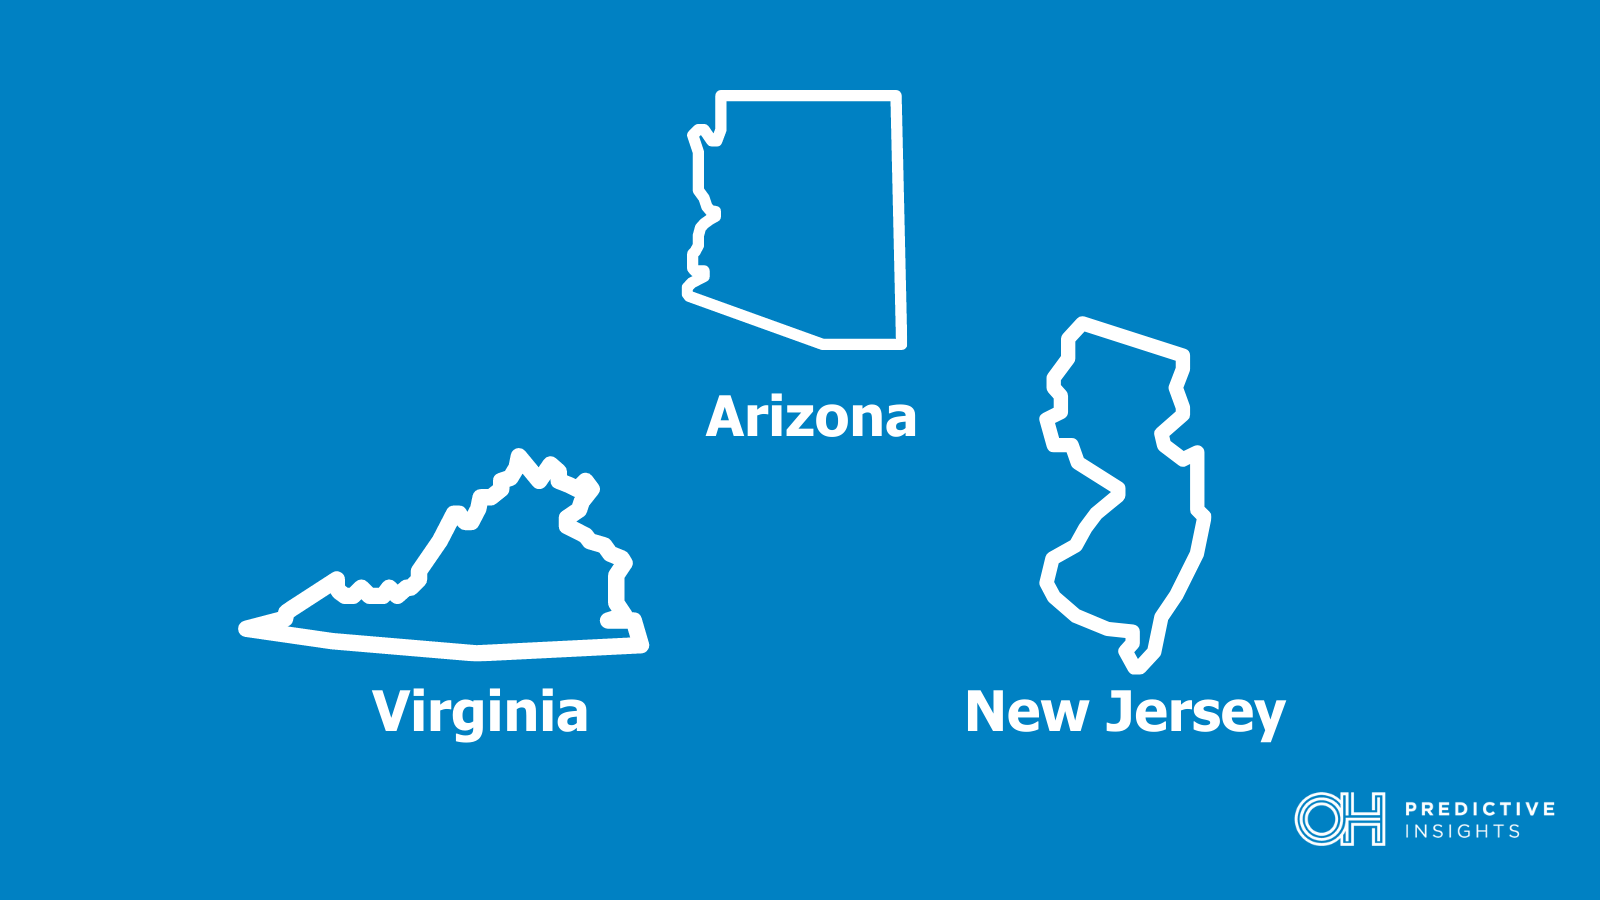 Virginia and New Jersey Swing Right – What Does this Mean for Arizona?